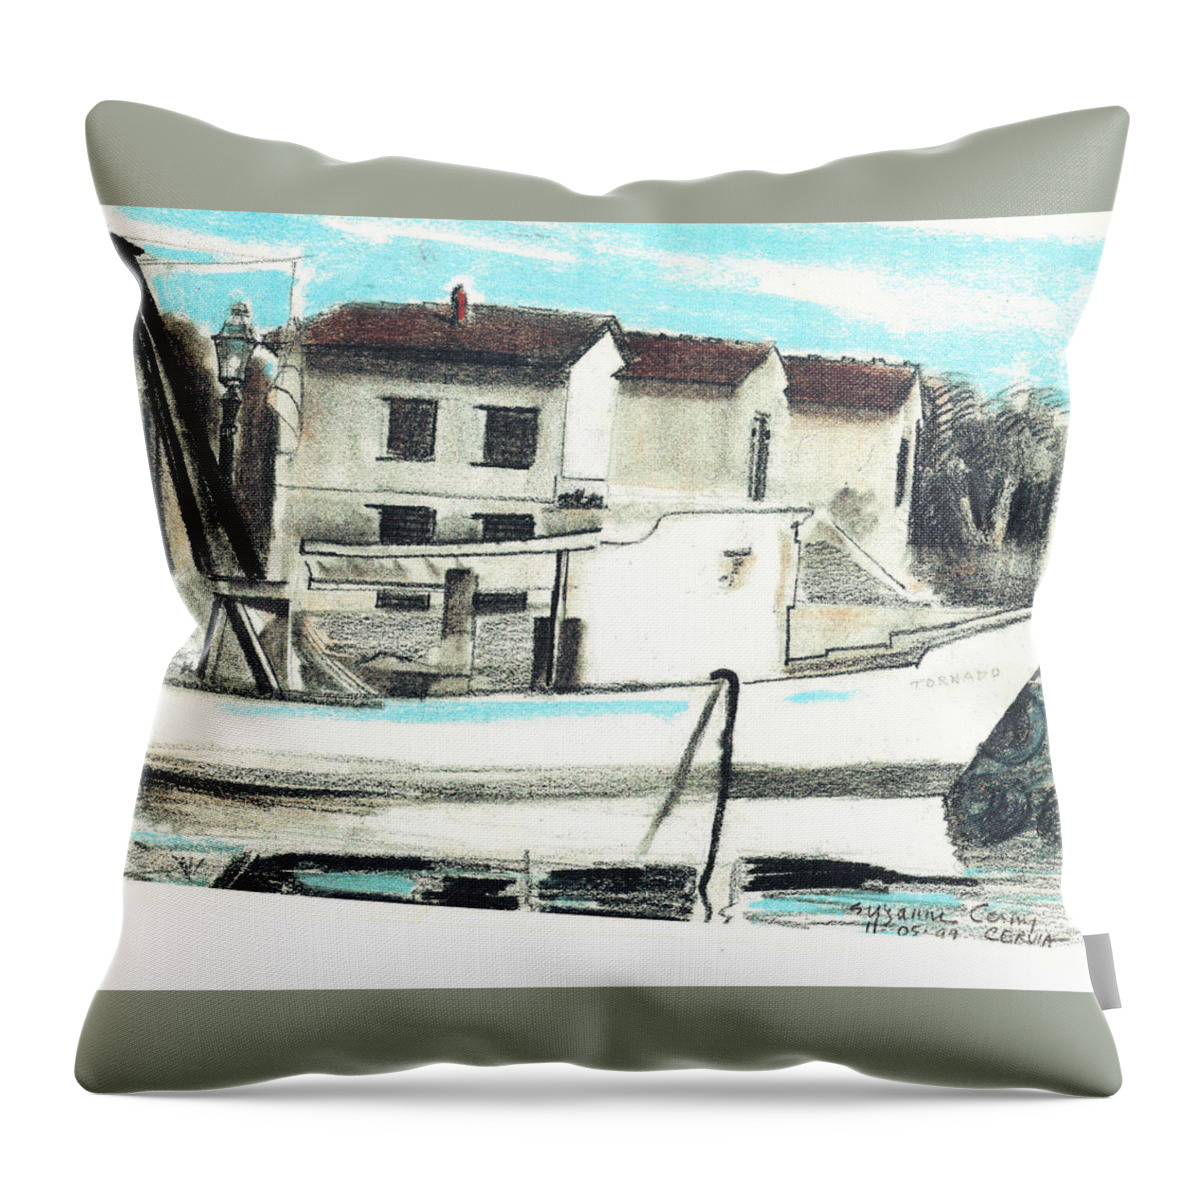 Houses On The Canal Throw Pillow featuring the painting Le Barche galleggianti nel mare Adriatico by Suzanne Giuriati Cerny